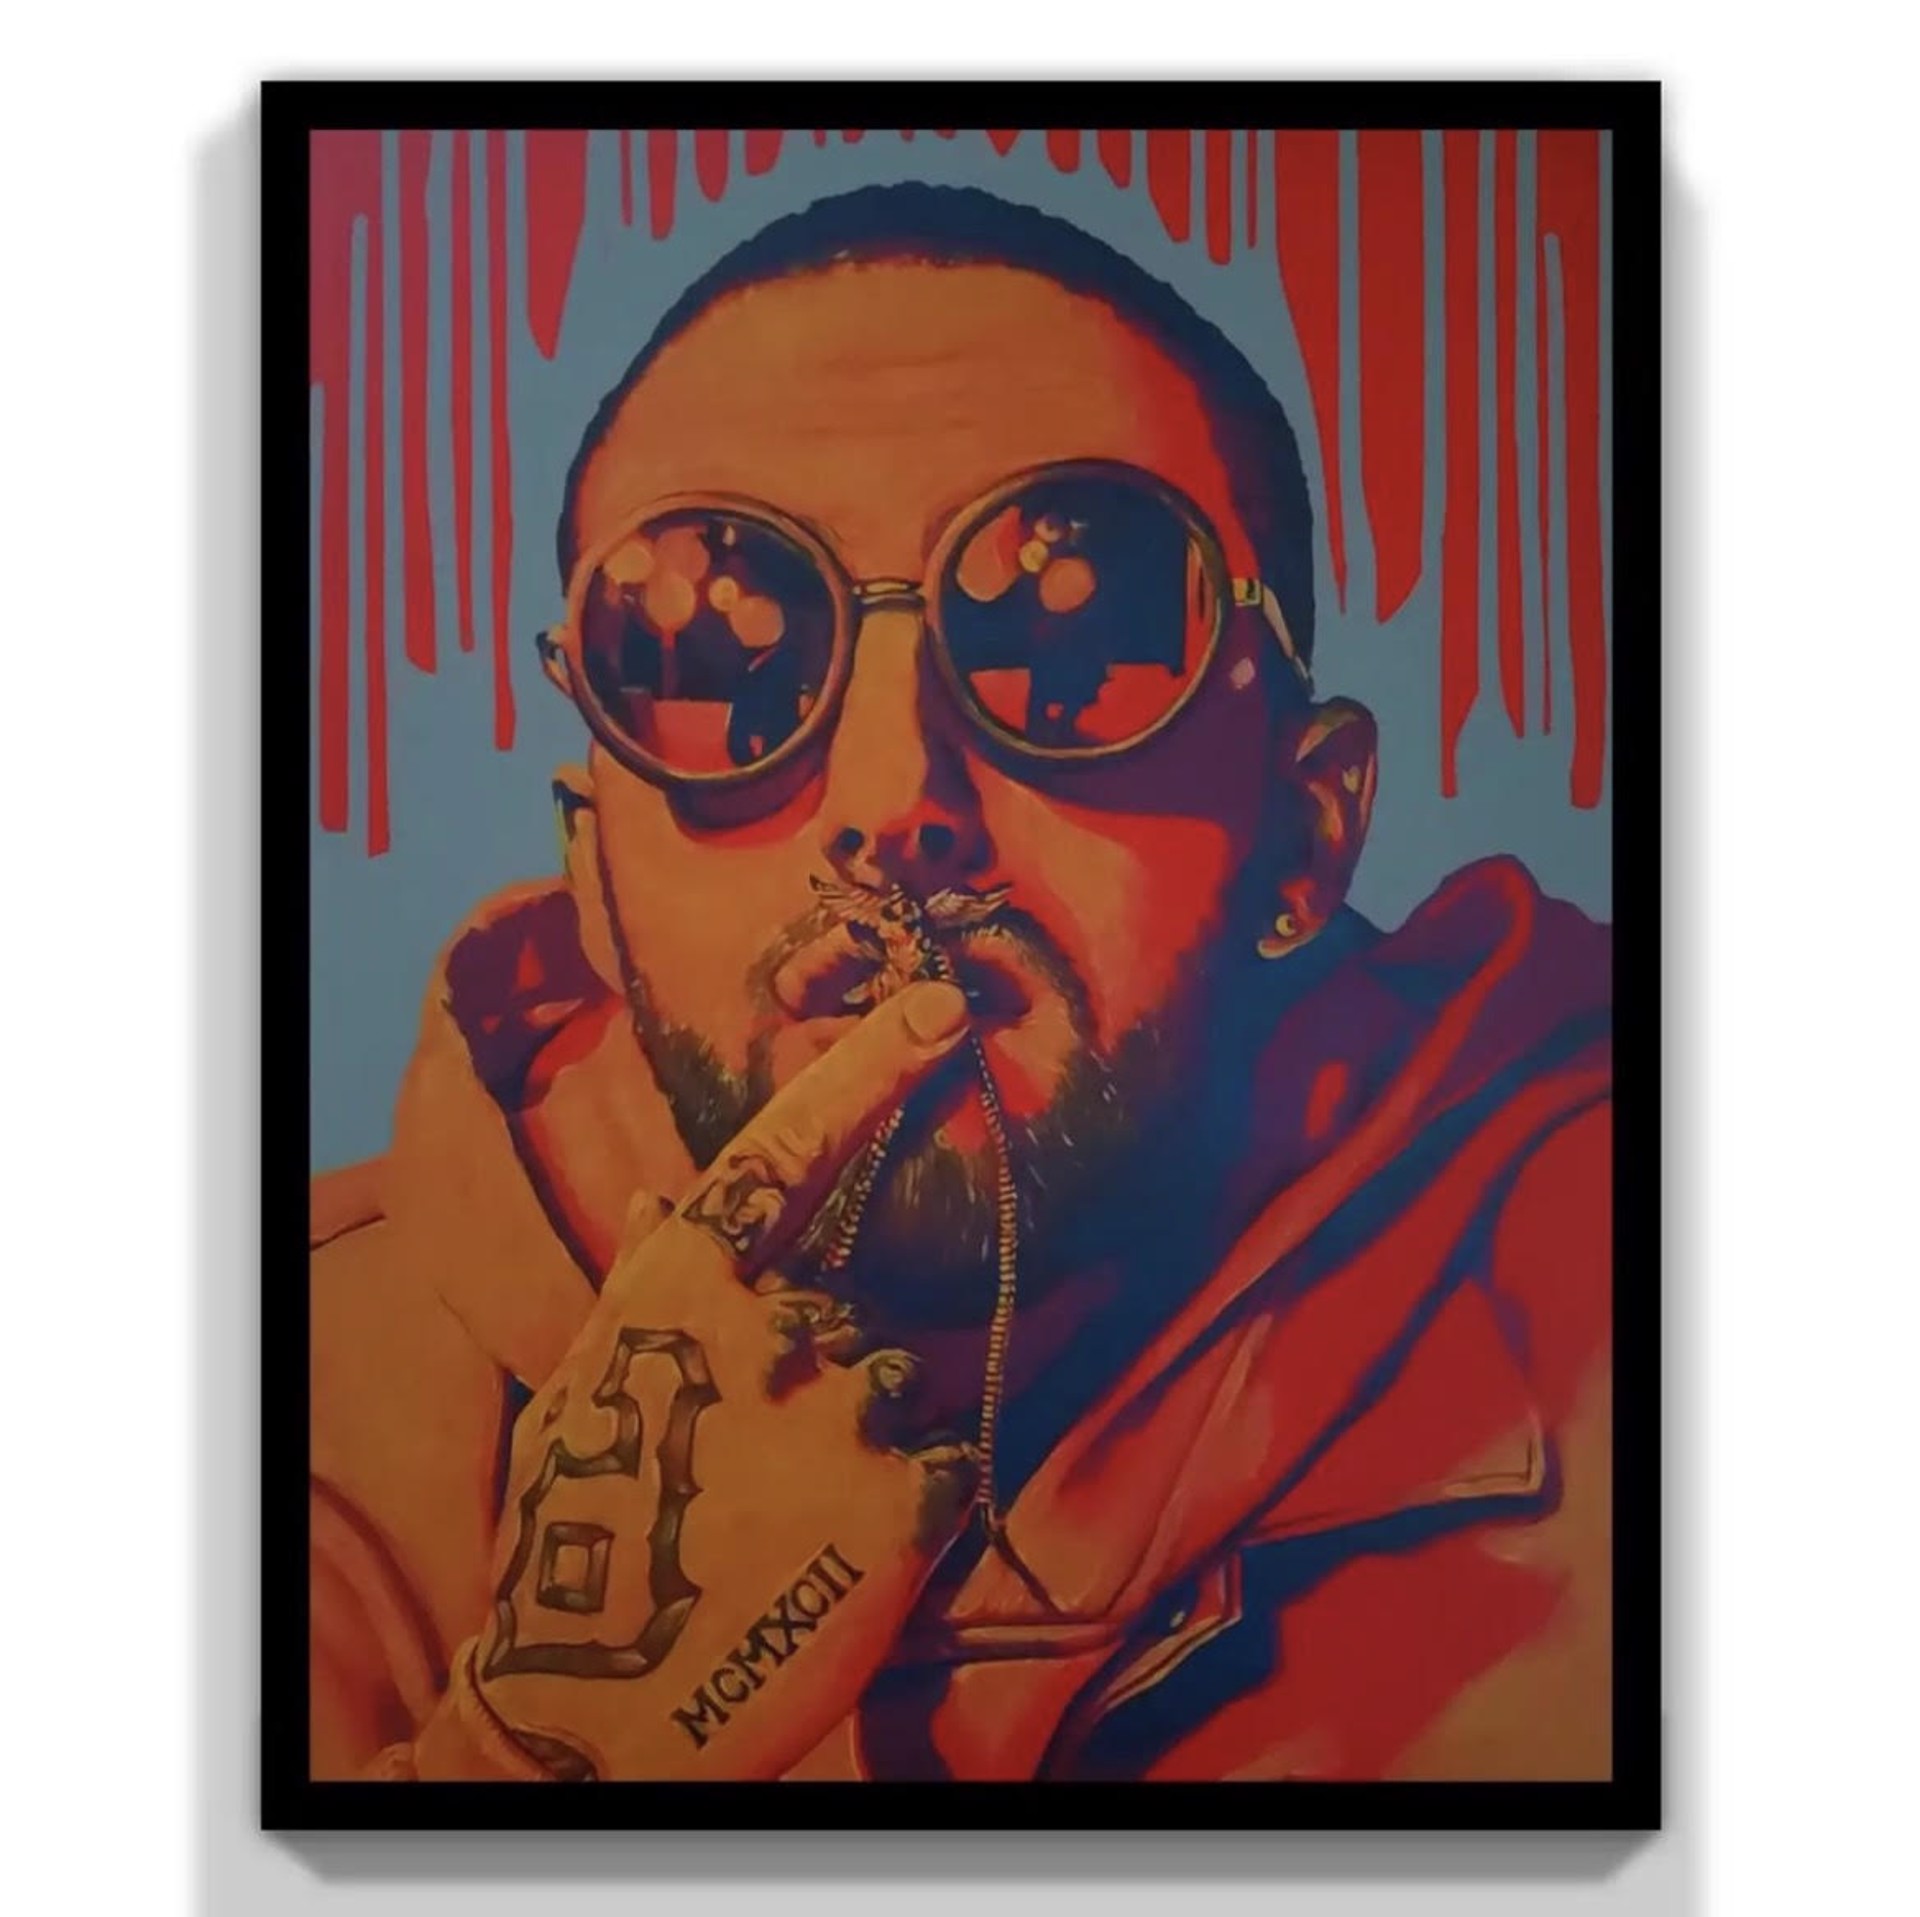 Colors and Shapes (Mac Miller) by Seth Gordon